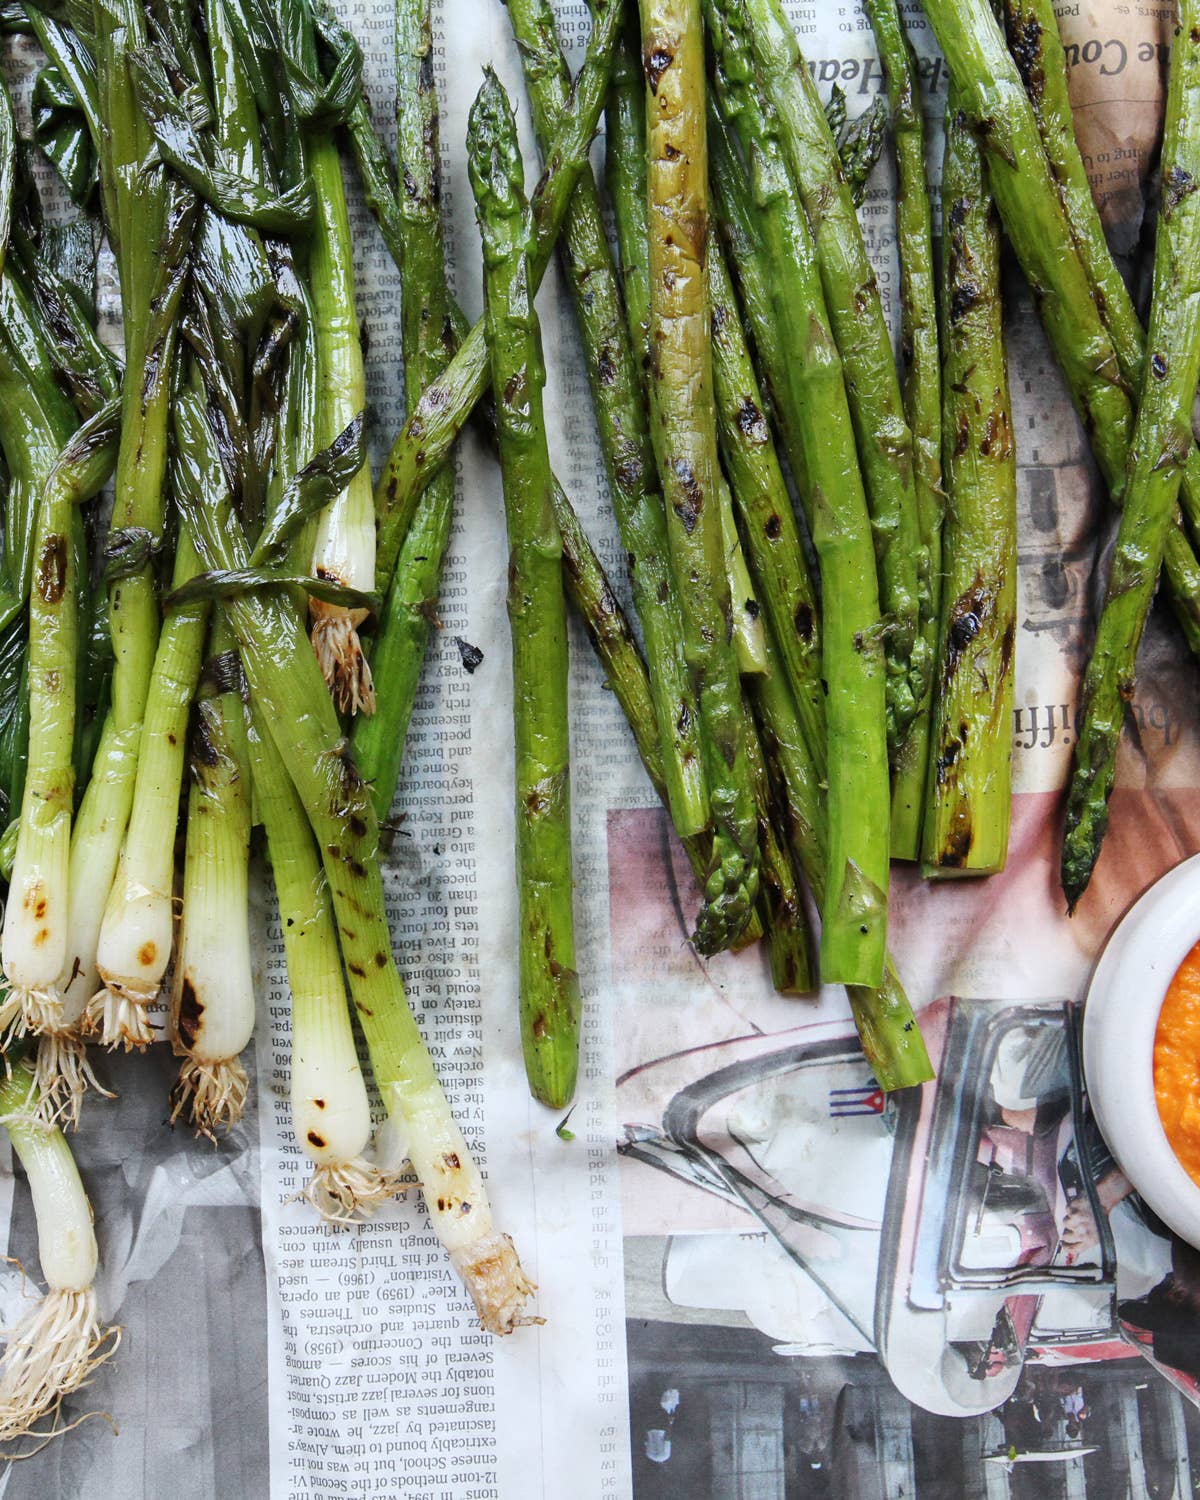 Grilled Calçots and Asparagus with Romesco Sauce